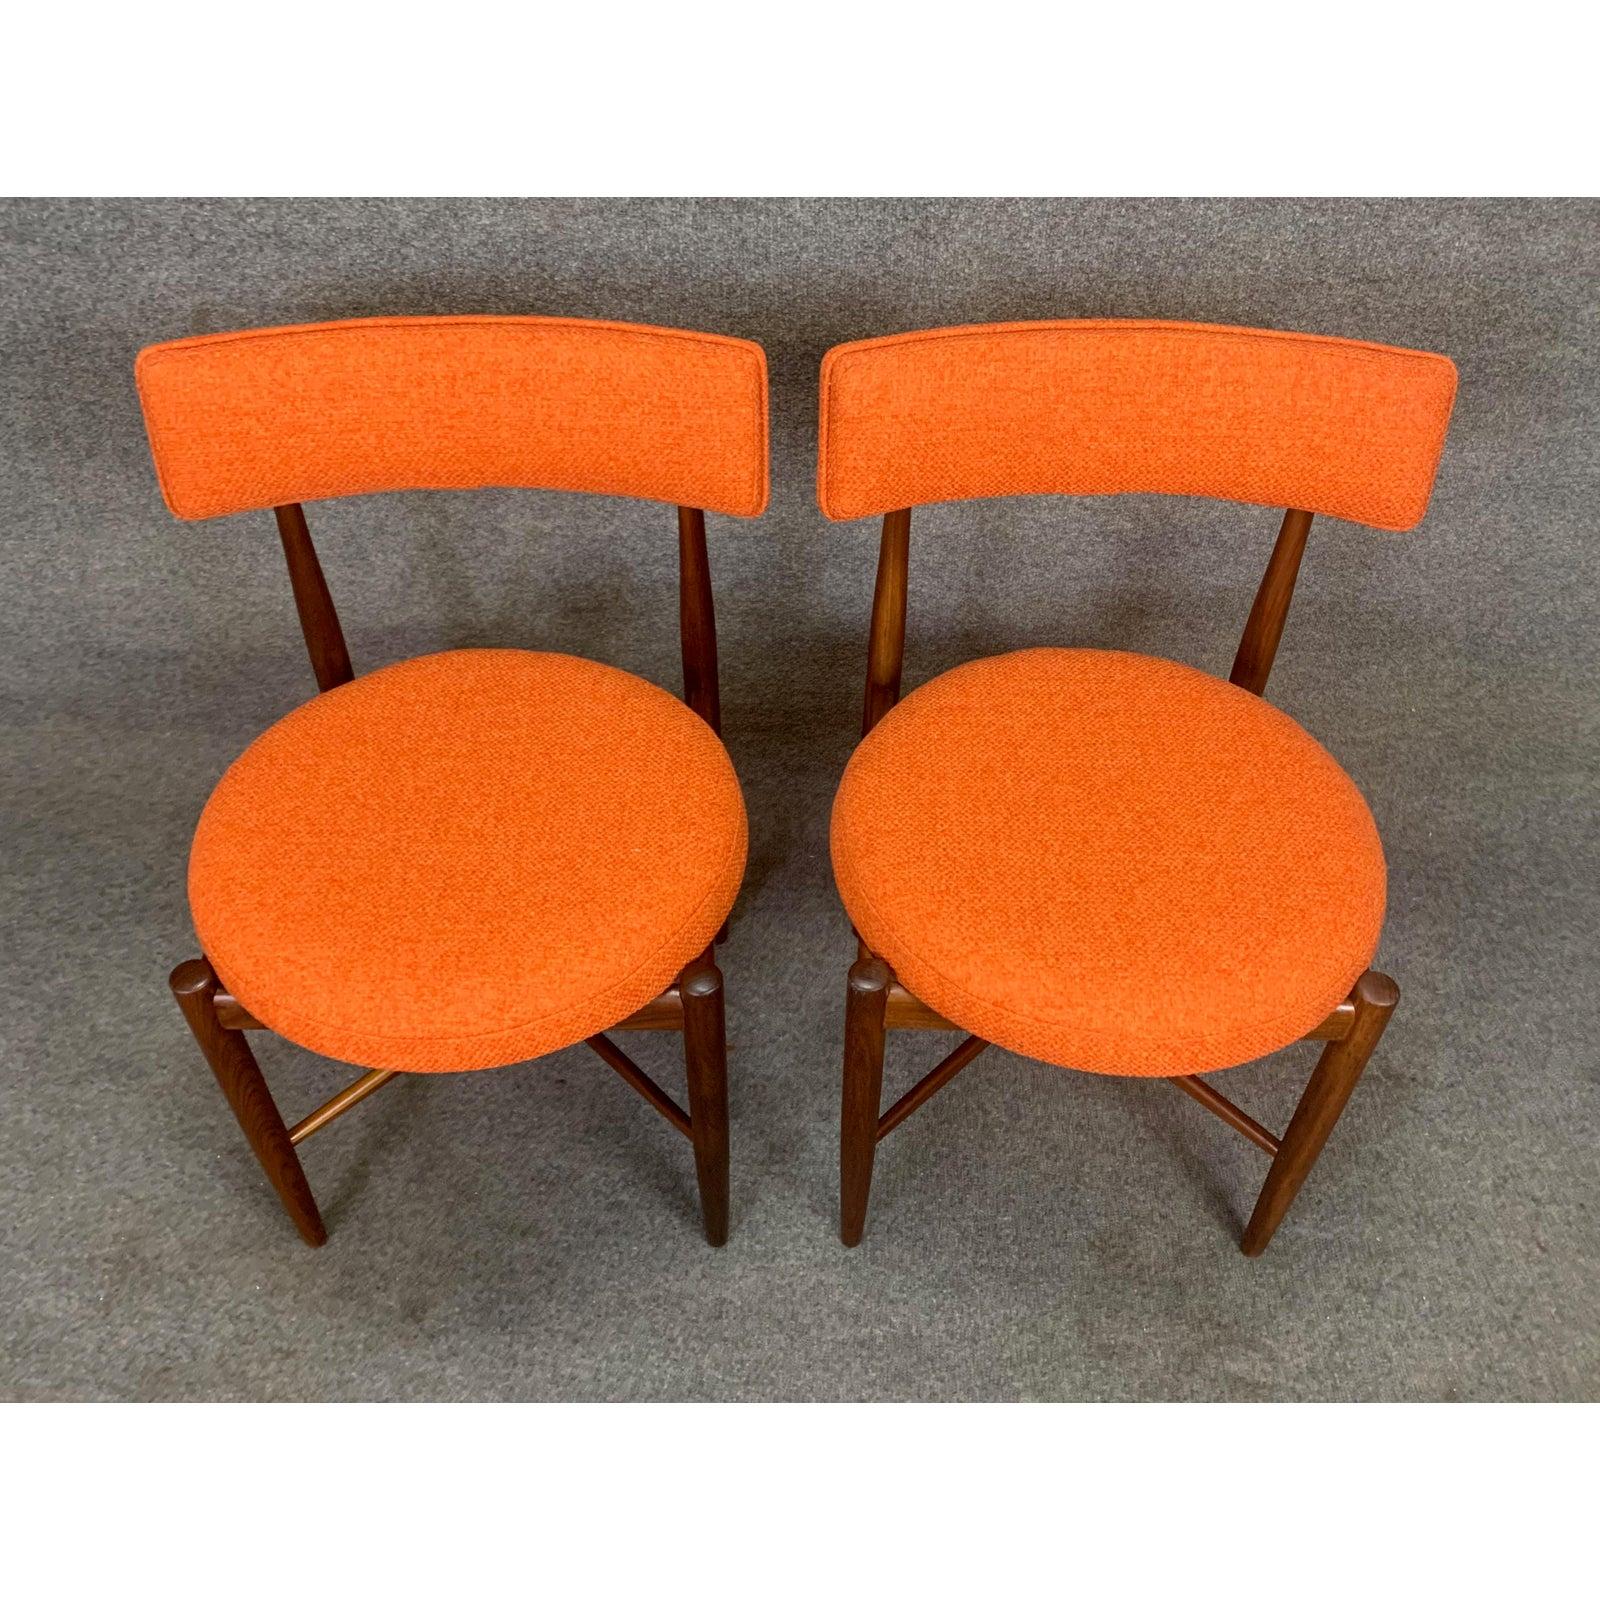 English Pair of Vintage British Mid-Century Modern Teak Accent Chairs by G Plan For Sale